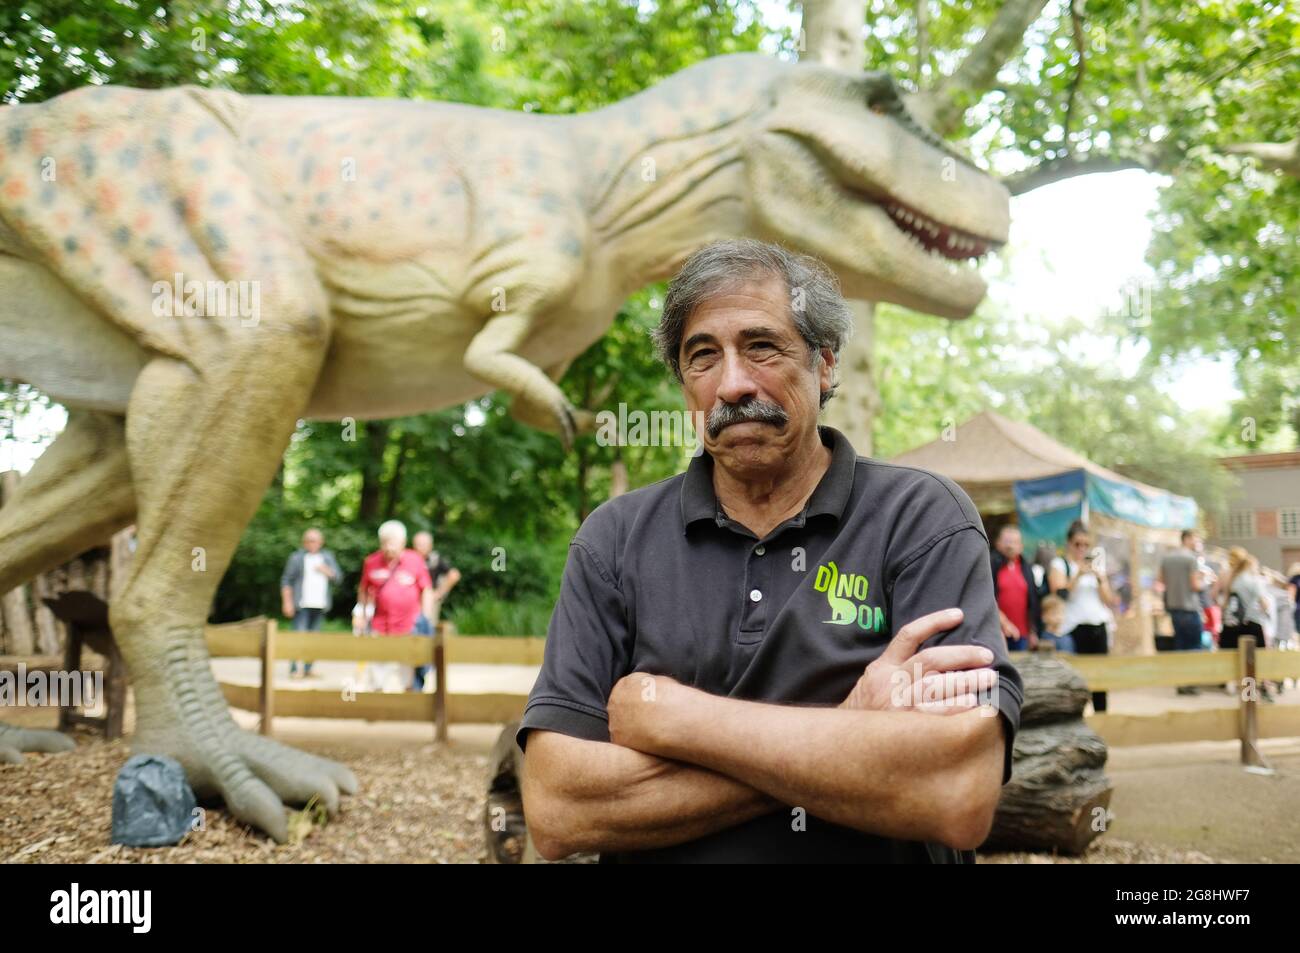 Leipzig, Germany. 20th July, 2021. Don Lessem, paleontologist and author, stands in front of a model of Tyrannosaurus rex at Leipzig Zoo. The life-size likeness is part of the exhibition 'The Gigantic Dino Adventure' on display there. Don Lessem also worked as a consultant for the film Jurassic Park. Credit: Sebastian Willnow/dpa-Zentralbild/dpa/Alamy Live News Stock Photo